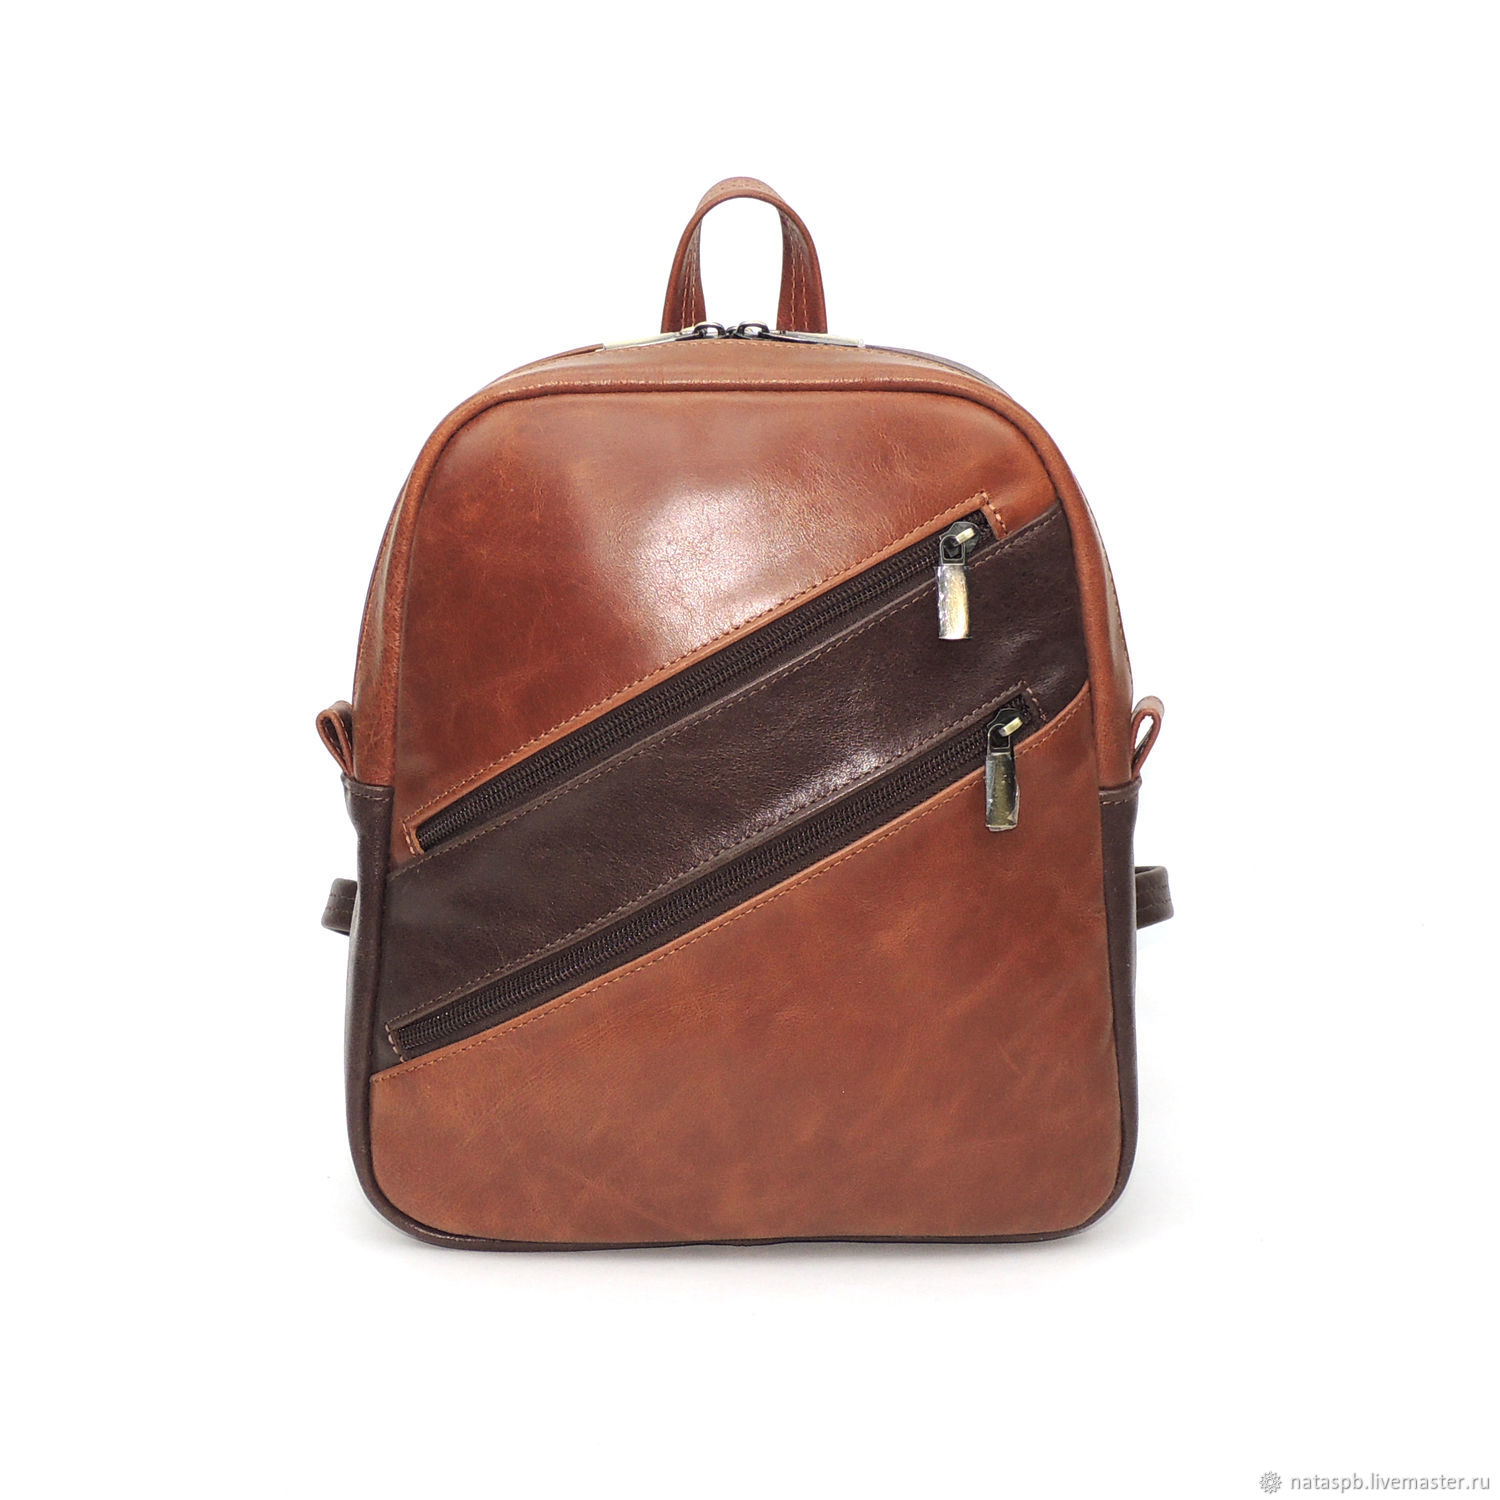  Leather women's backpack brown-red Jesy Mod. R. 27-602-1, Backpacks, St. Petersburg,  Фото №1